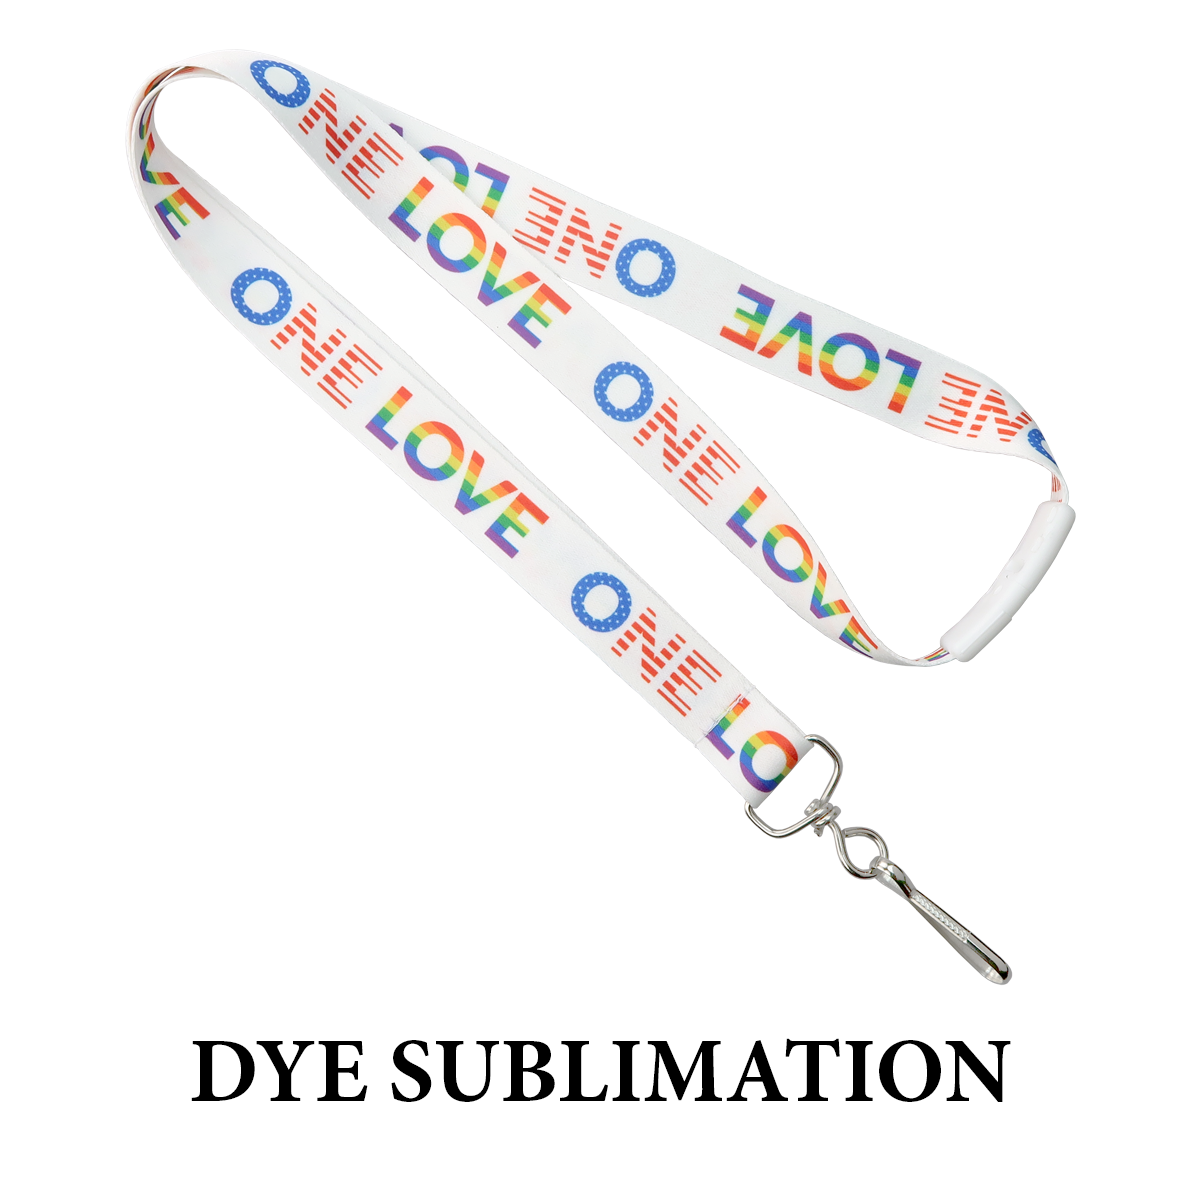 A white lanyard with the words "ONE LOVE" repeated in colorful letters, featuring a metal clasp. The text "Custom Printed Lanyards Online Designer - Personalized Lanyards for Company, Conference, and VIP Events" is printed below the lanyard. Perfect for bulk lanyards orders and custom designs using silk screen printing.